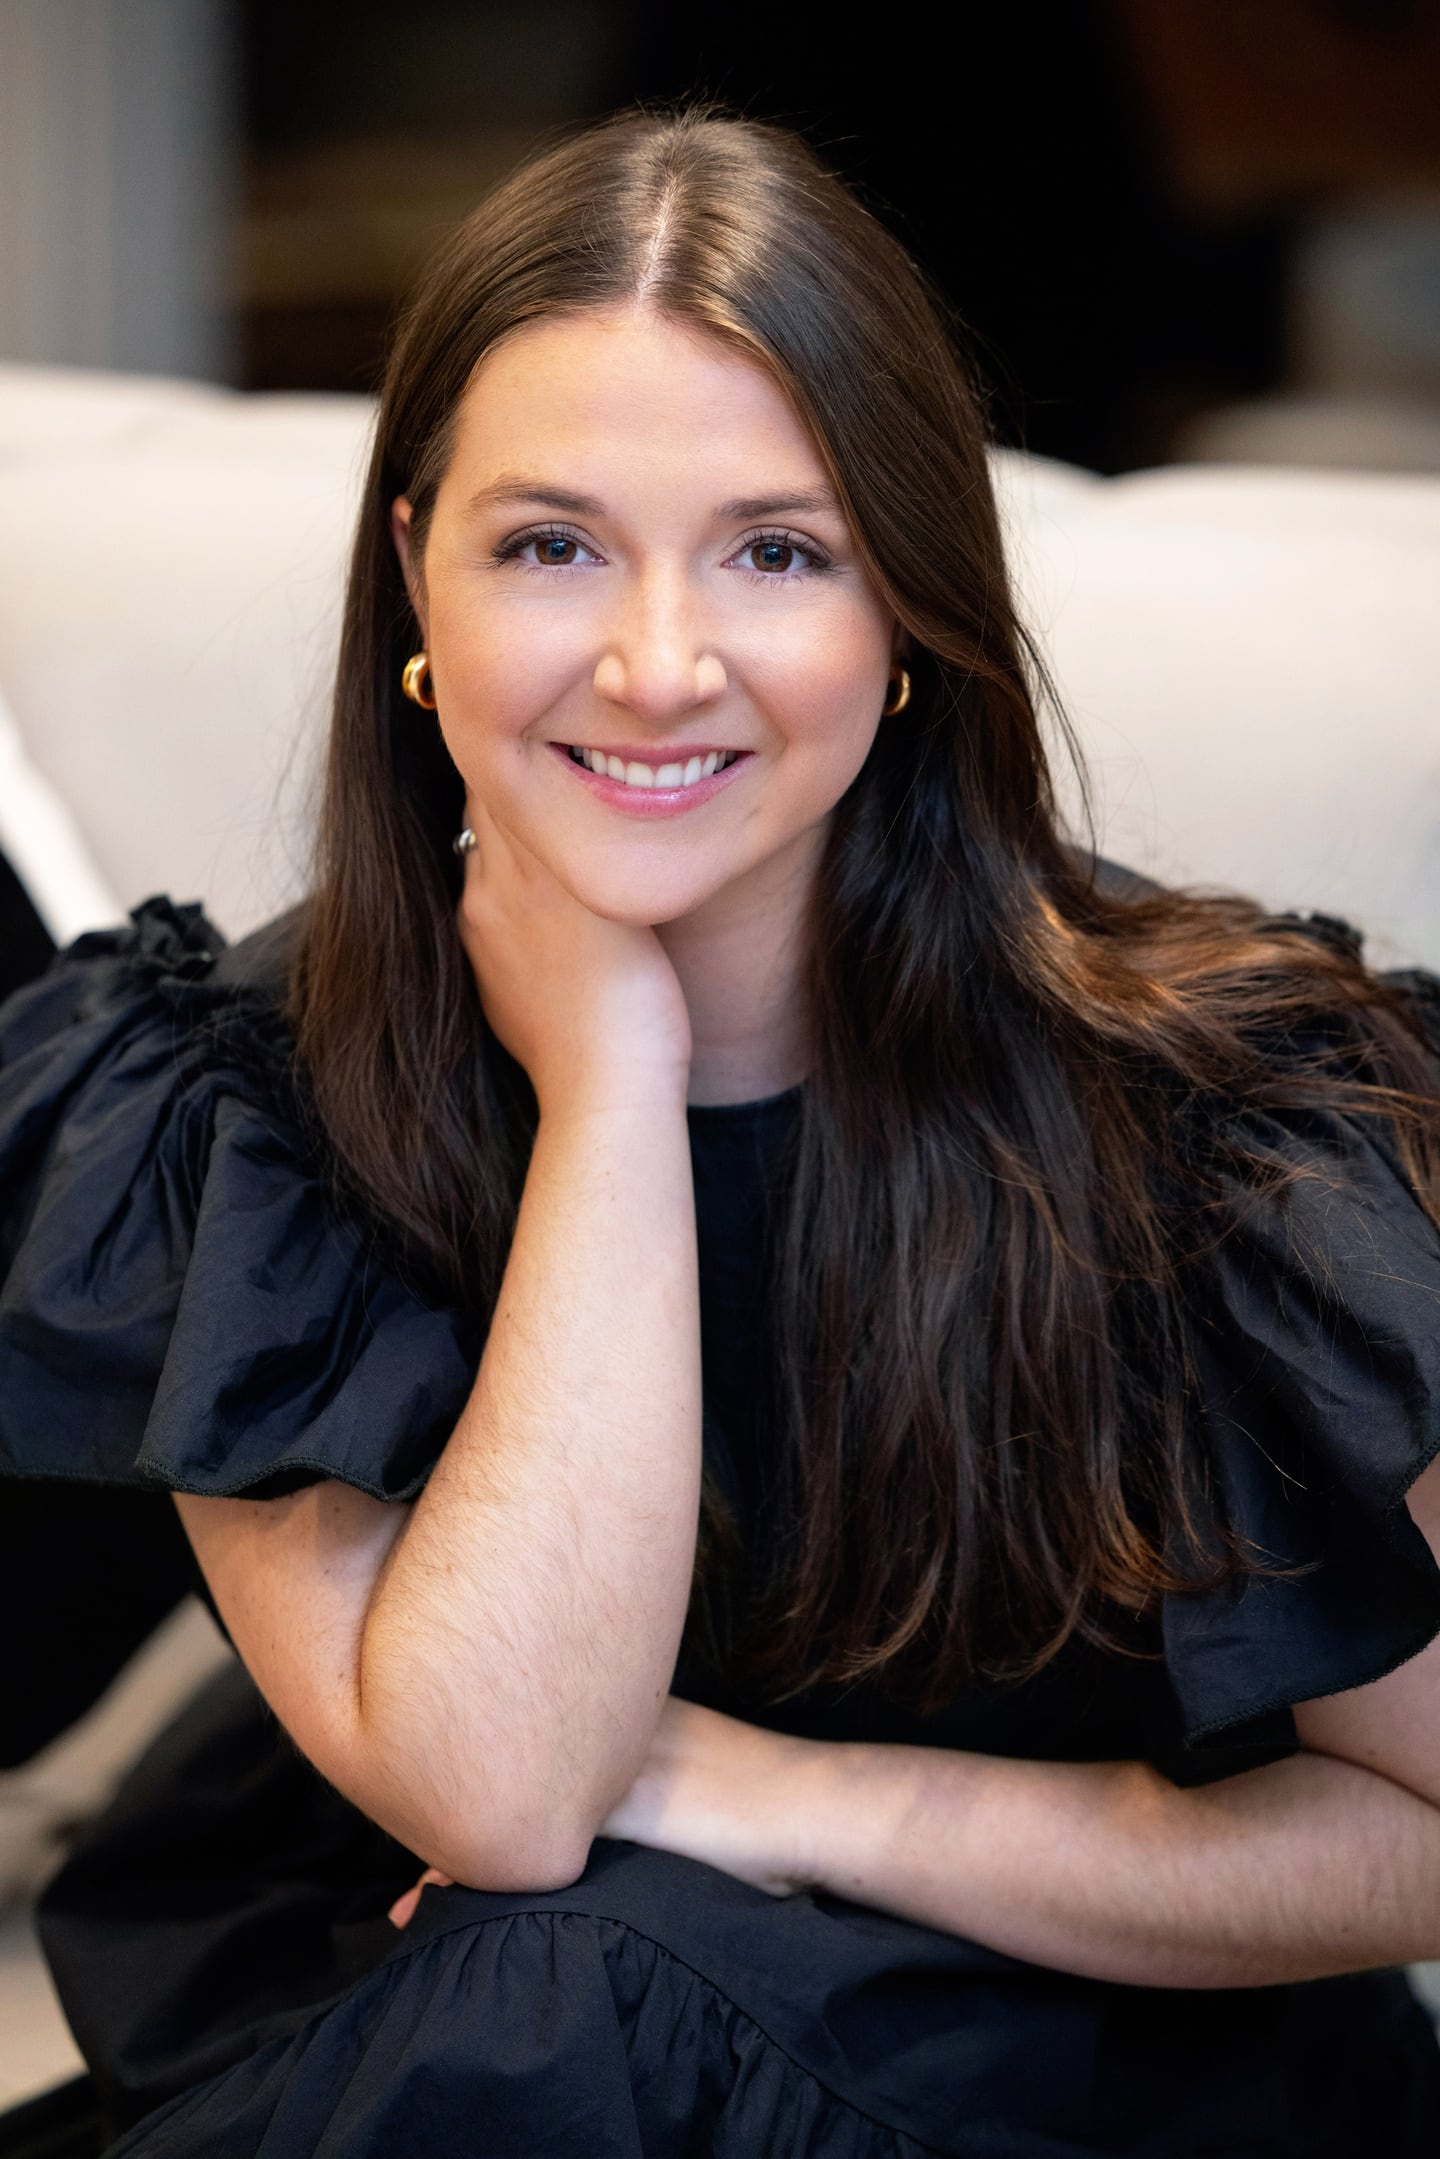 Béatrice Amyot was nominated as a young entrepreneur in the 